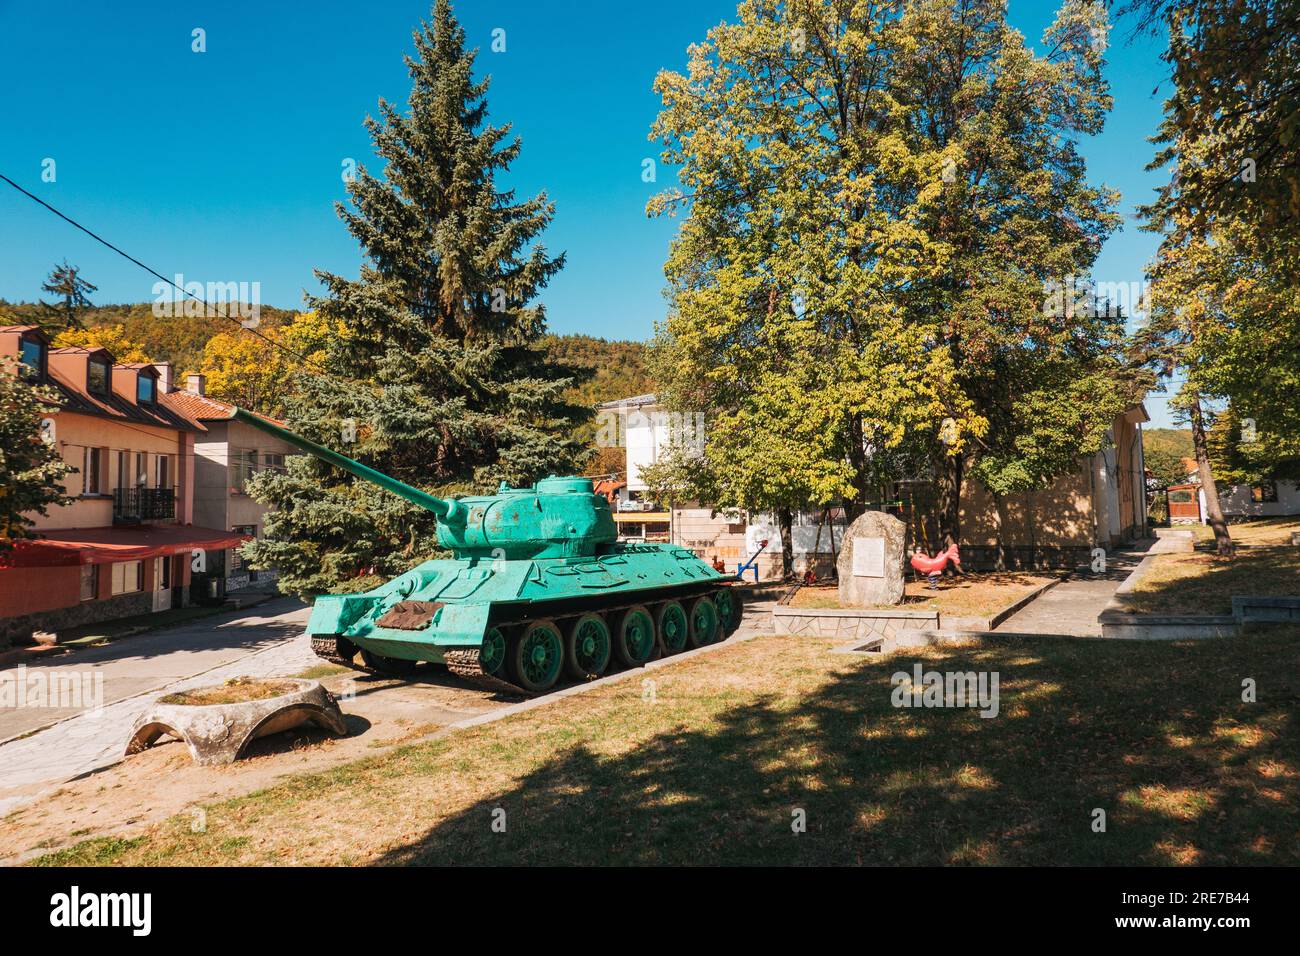 an old soviet T-34 tank on display in a park in the village of Raduil, in rural Bulgaria Stock Photo